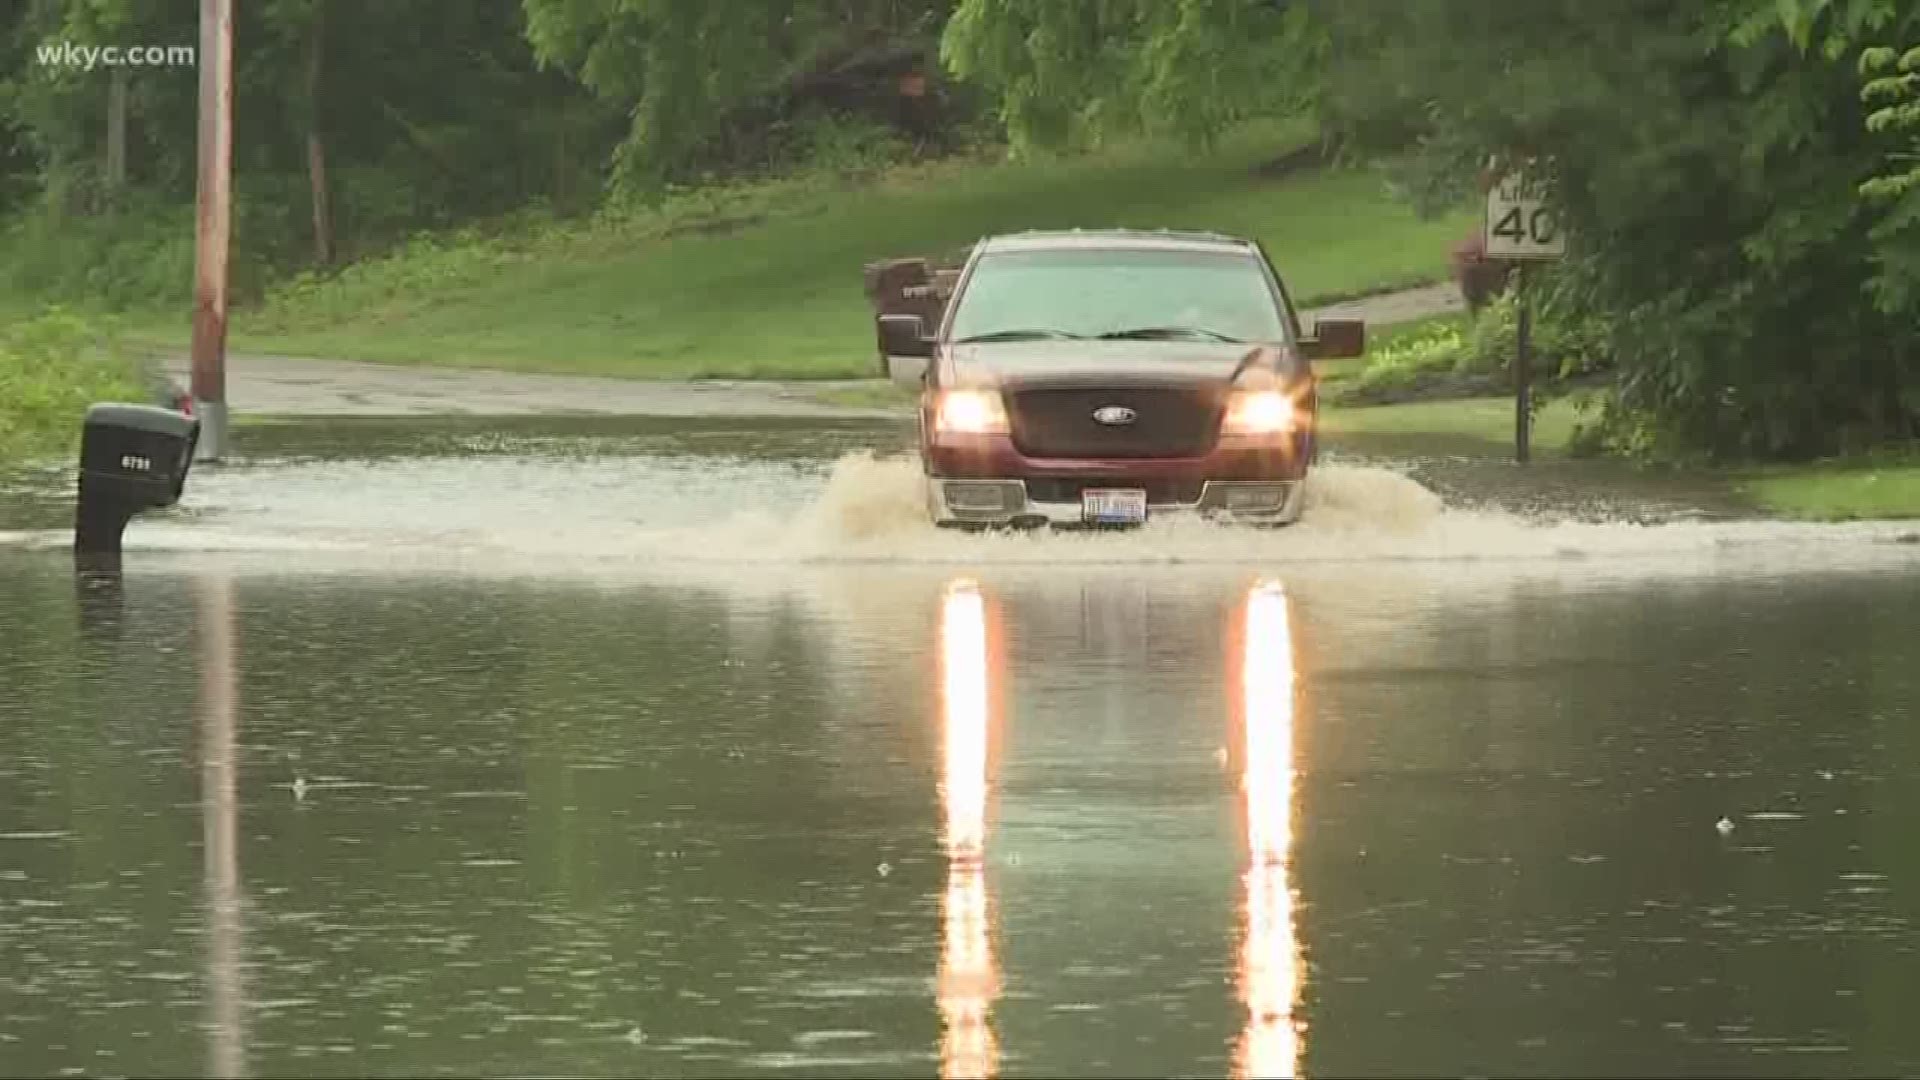 One area resident says it’s the worst flooding he’s seen since 1969.